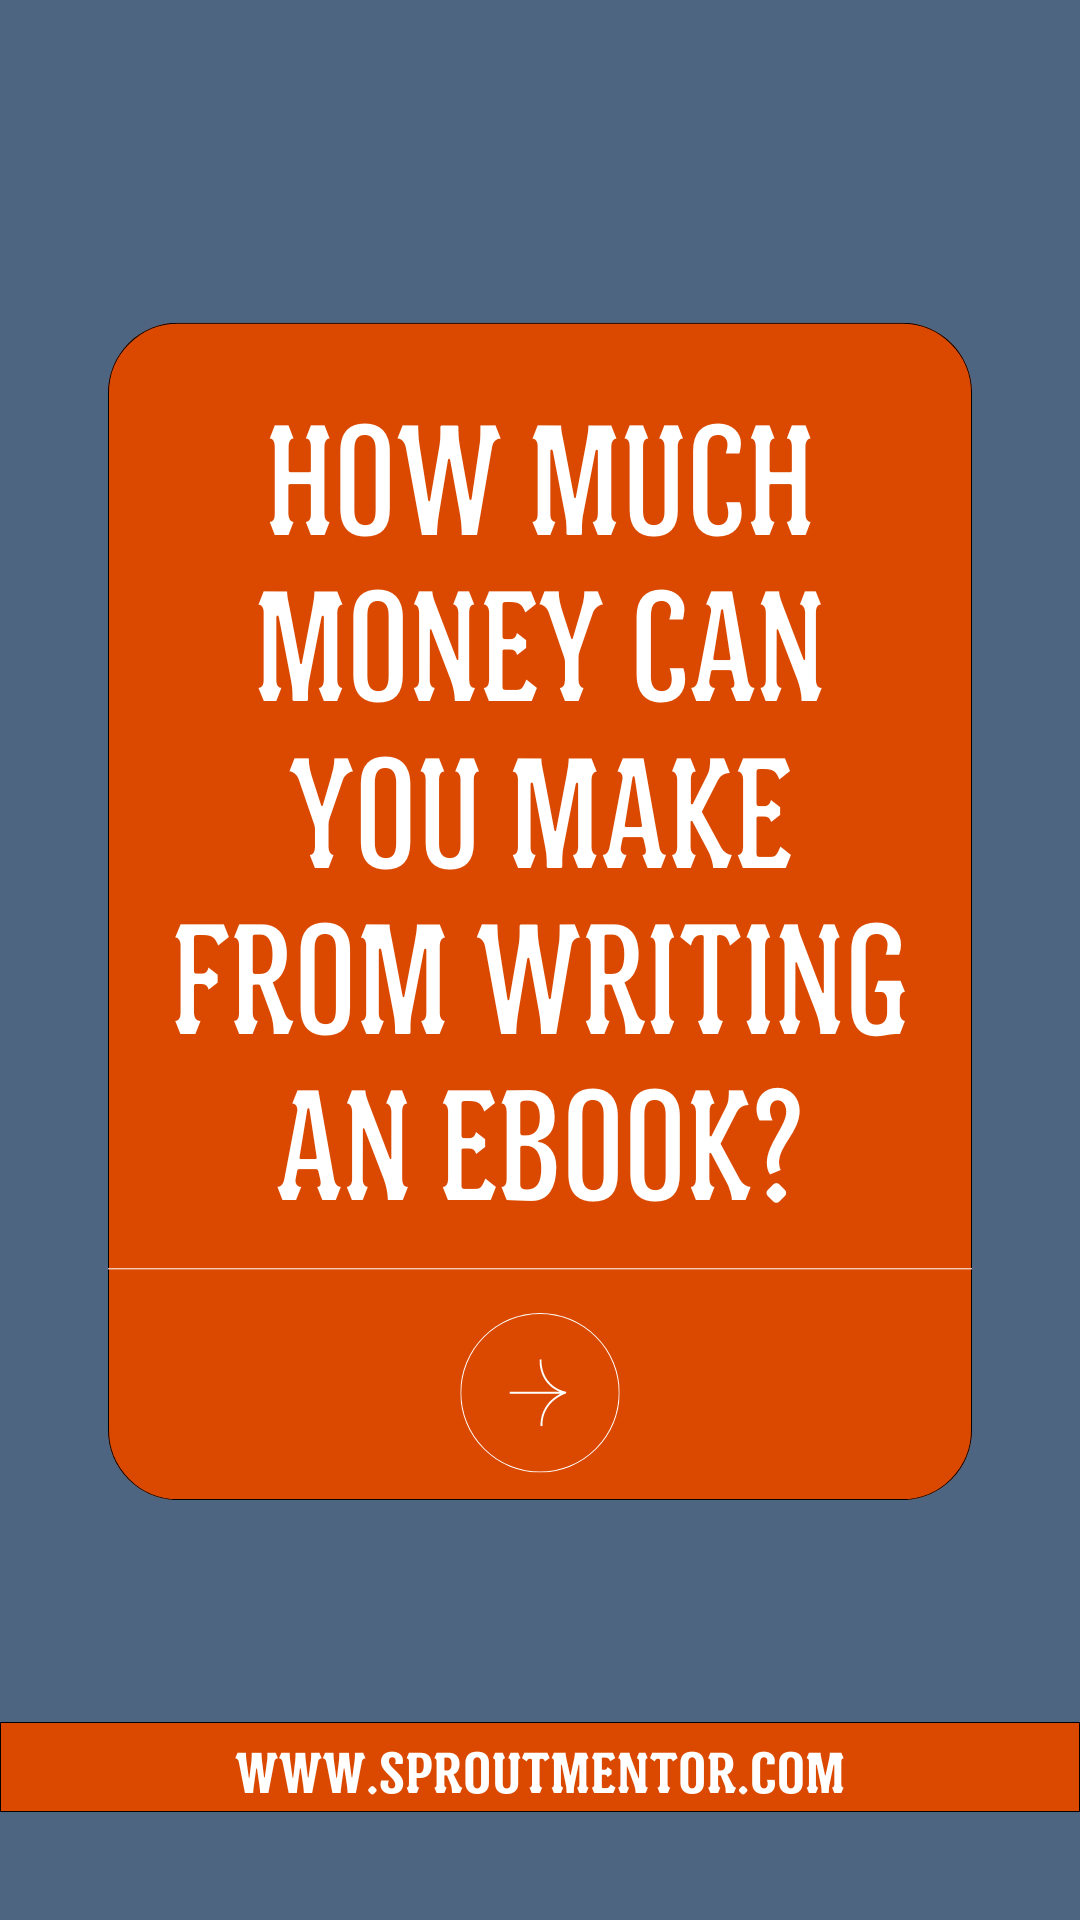 How-Much-Money-Can-You-Make-from-Writing-an-Ebook-sproutmentor featured image